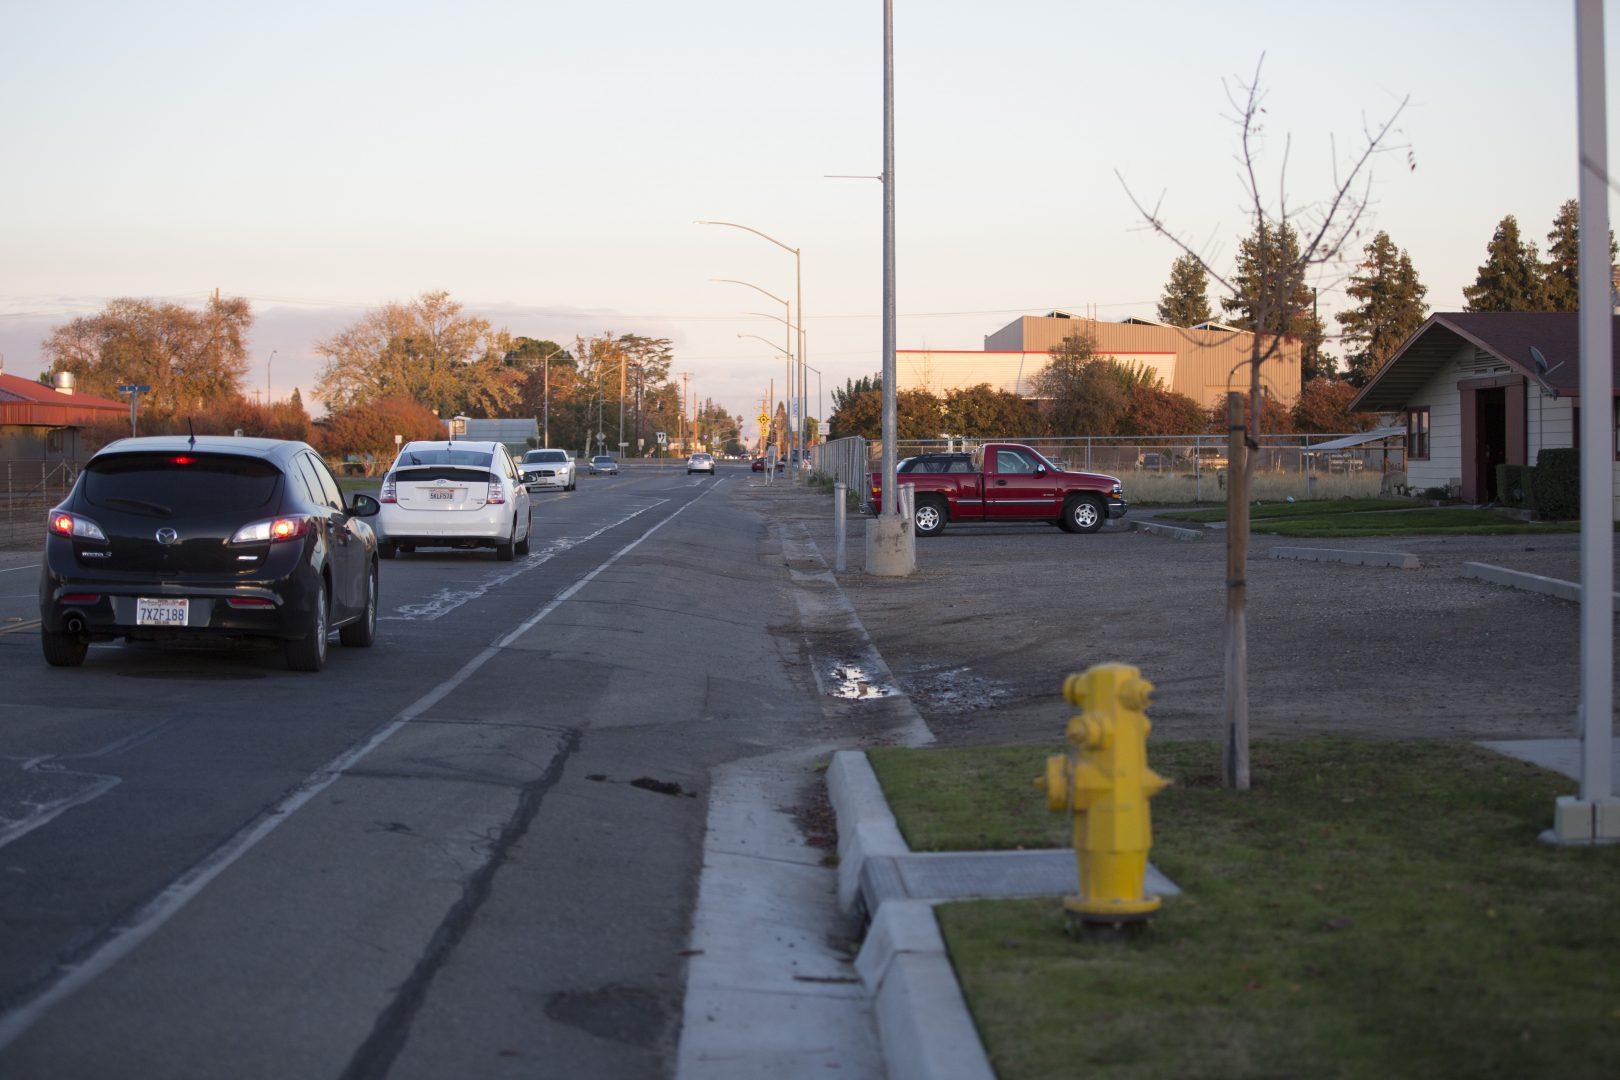 The bike path on Barstow Avenue between Cedar and Chestnut avenues on Nov. 27, 2017. Parts of the bike path are worn out or erased and at some points the path is nonexistent. (Daniel Avalos/The Collegian)